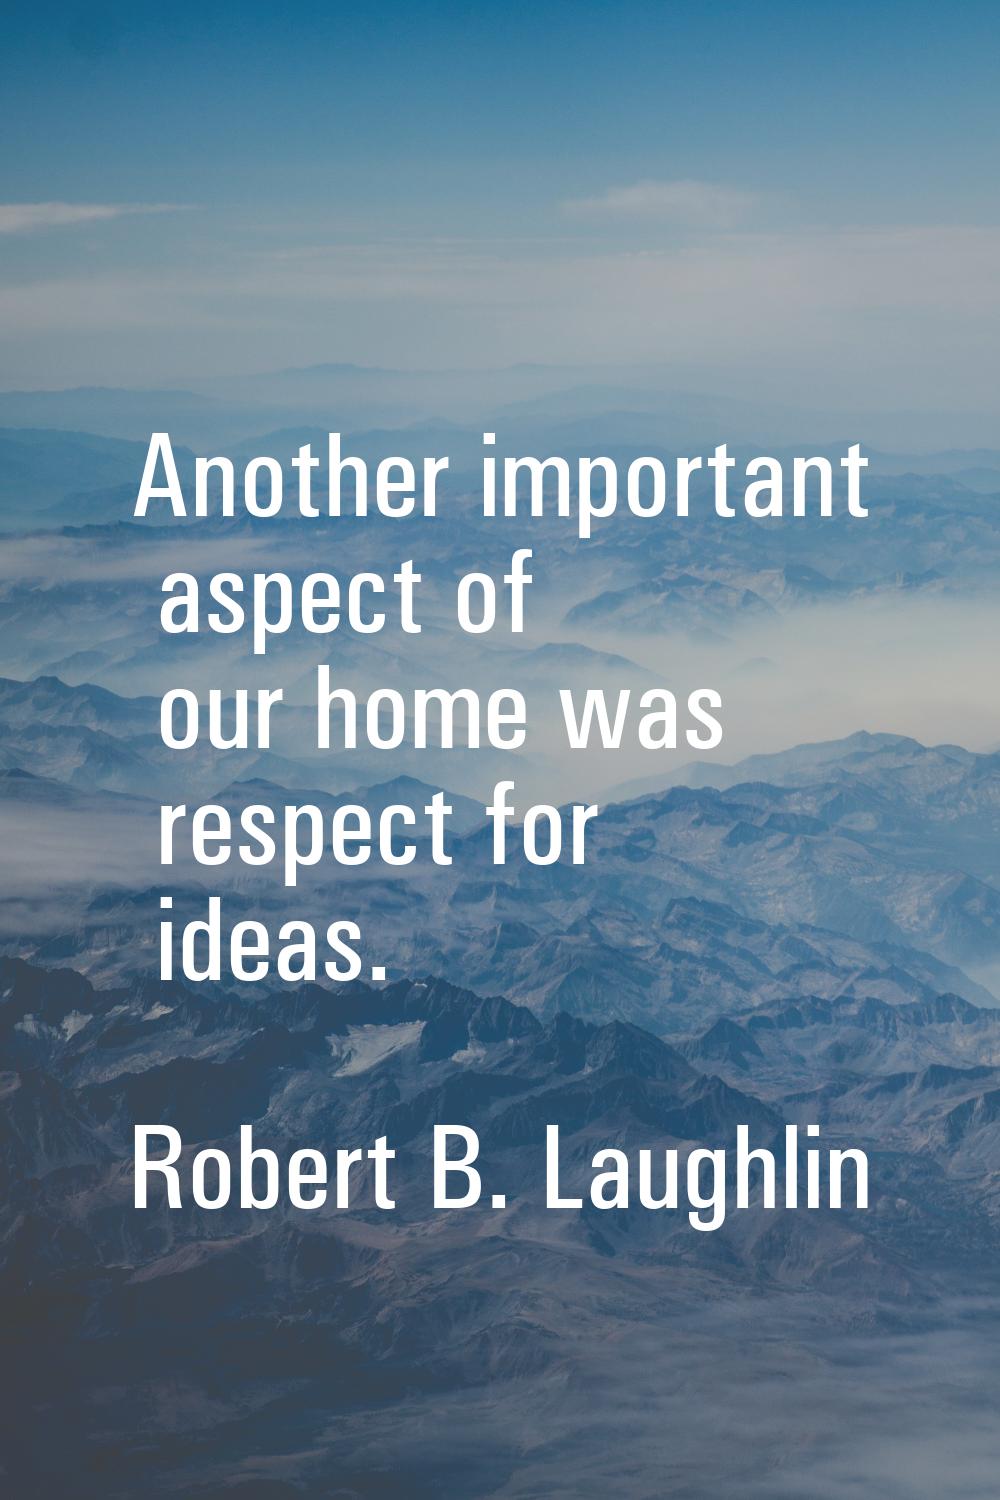 Another important aspect of our home was respect for ideas.